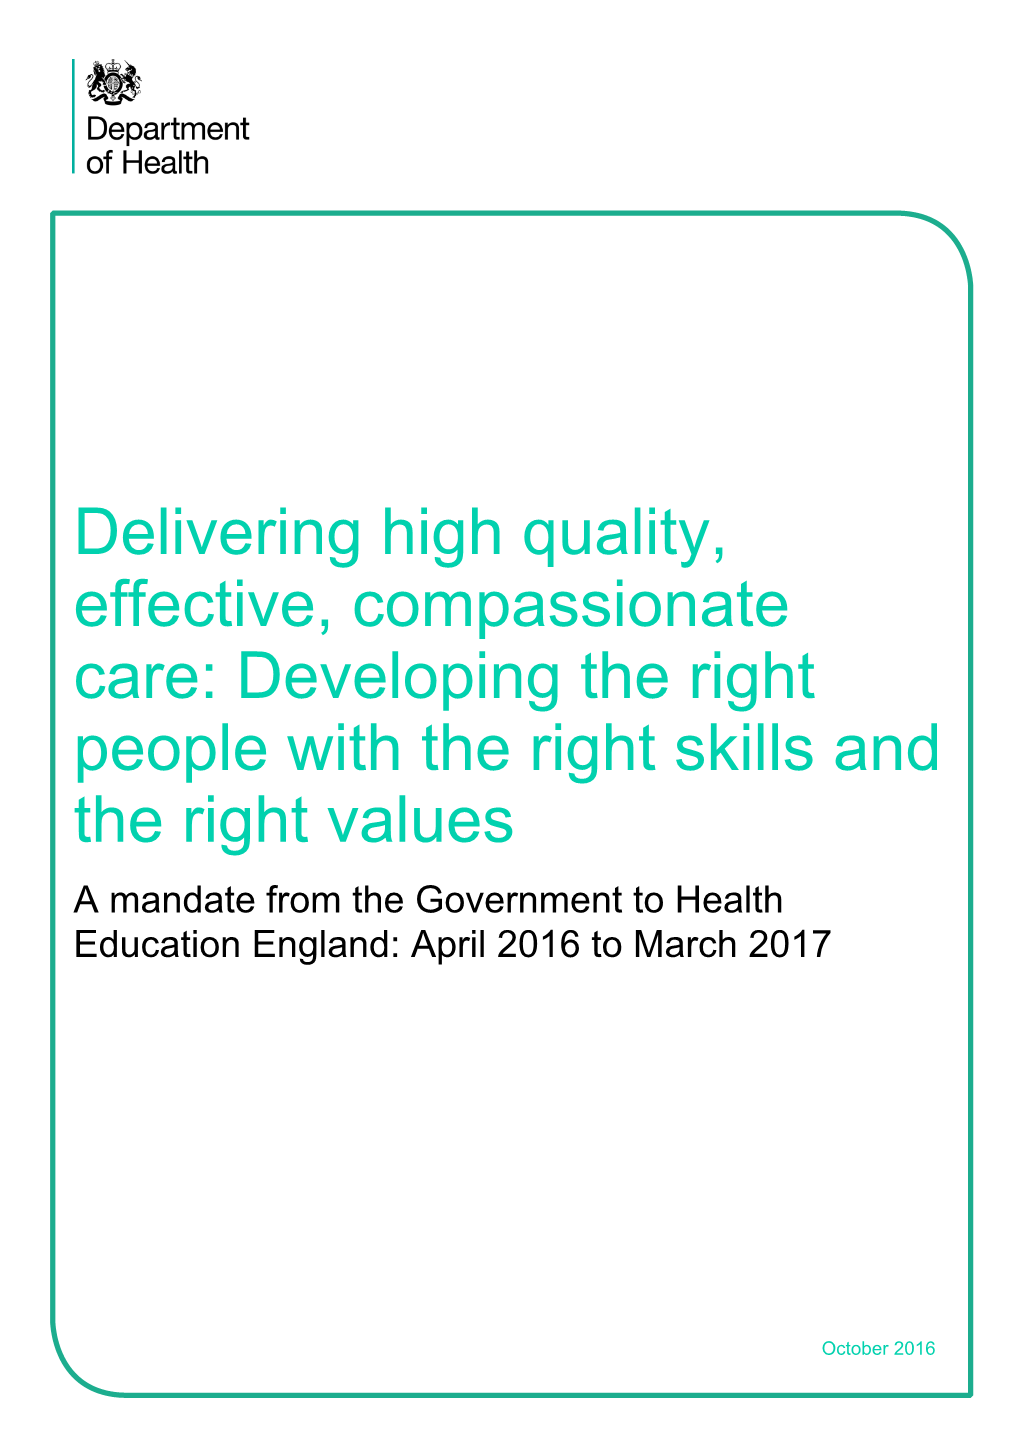 A Mandate from the Government to Health Education England: April 2016 to March 2017